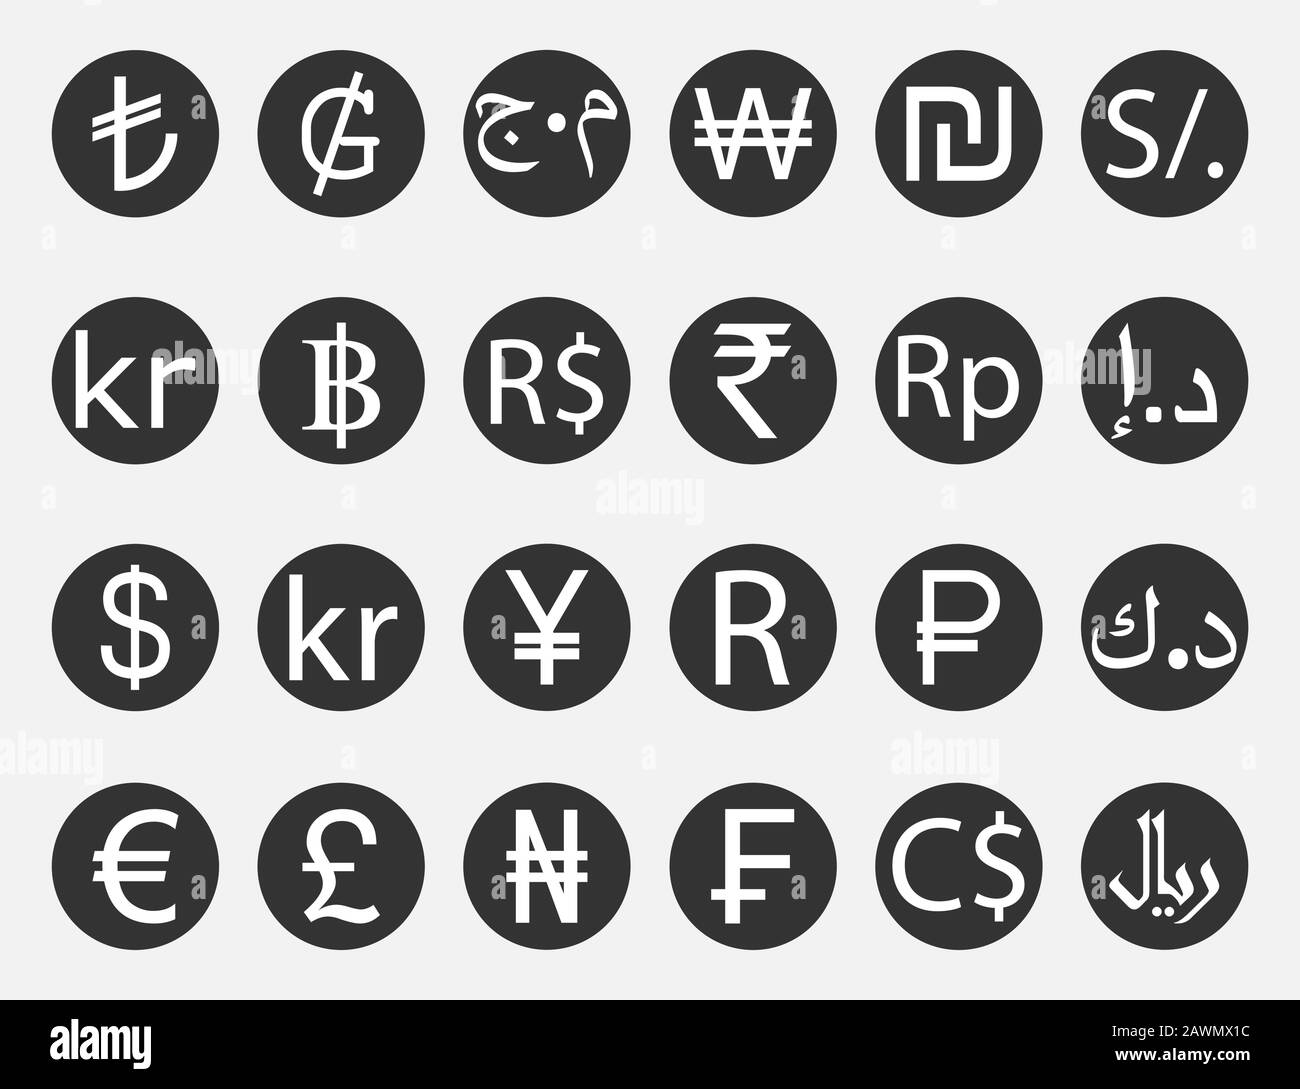 Currency symbol, icon set. Vector illustration, flat design. Stock Vector